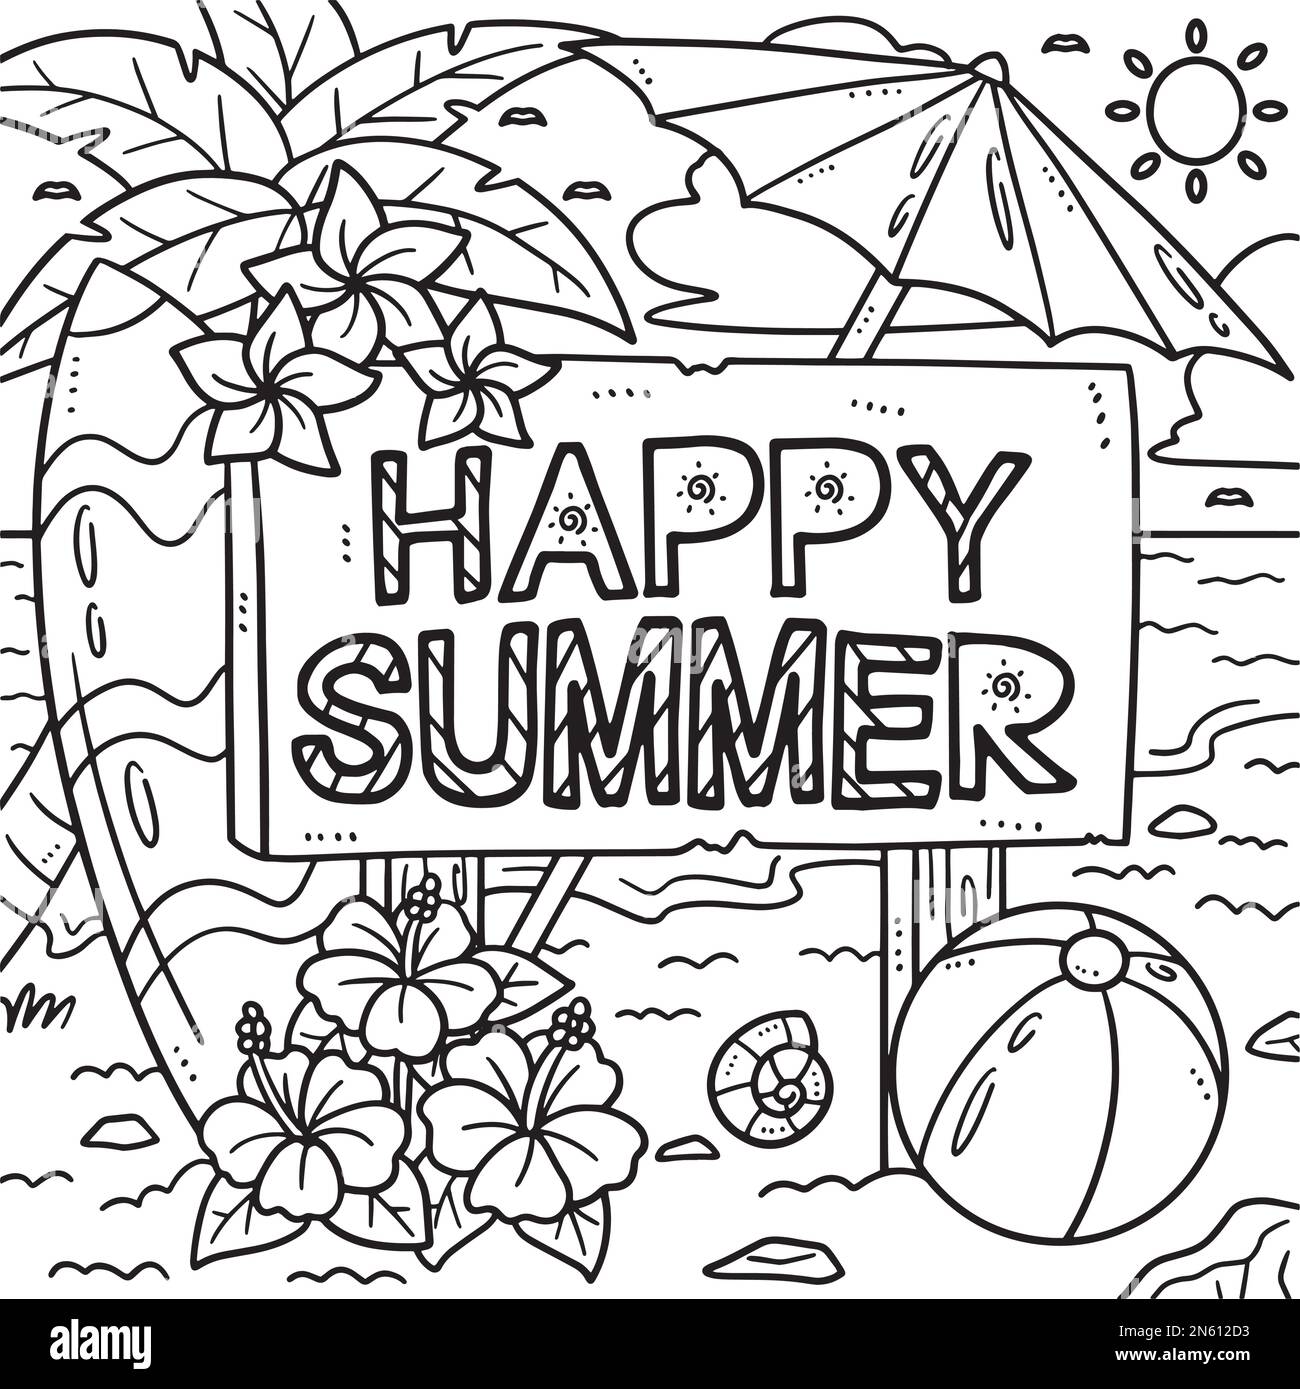 Summer season happy black and white stock photos images